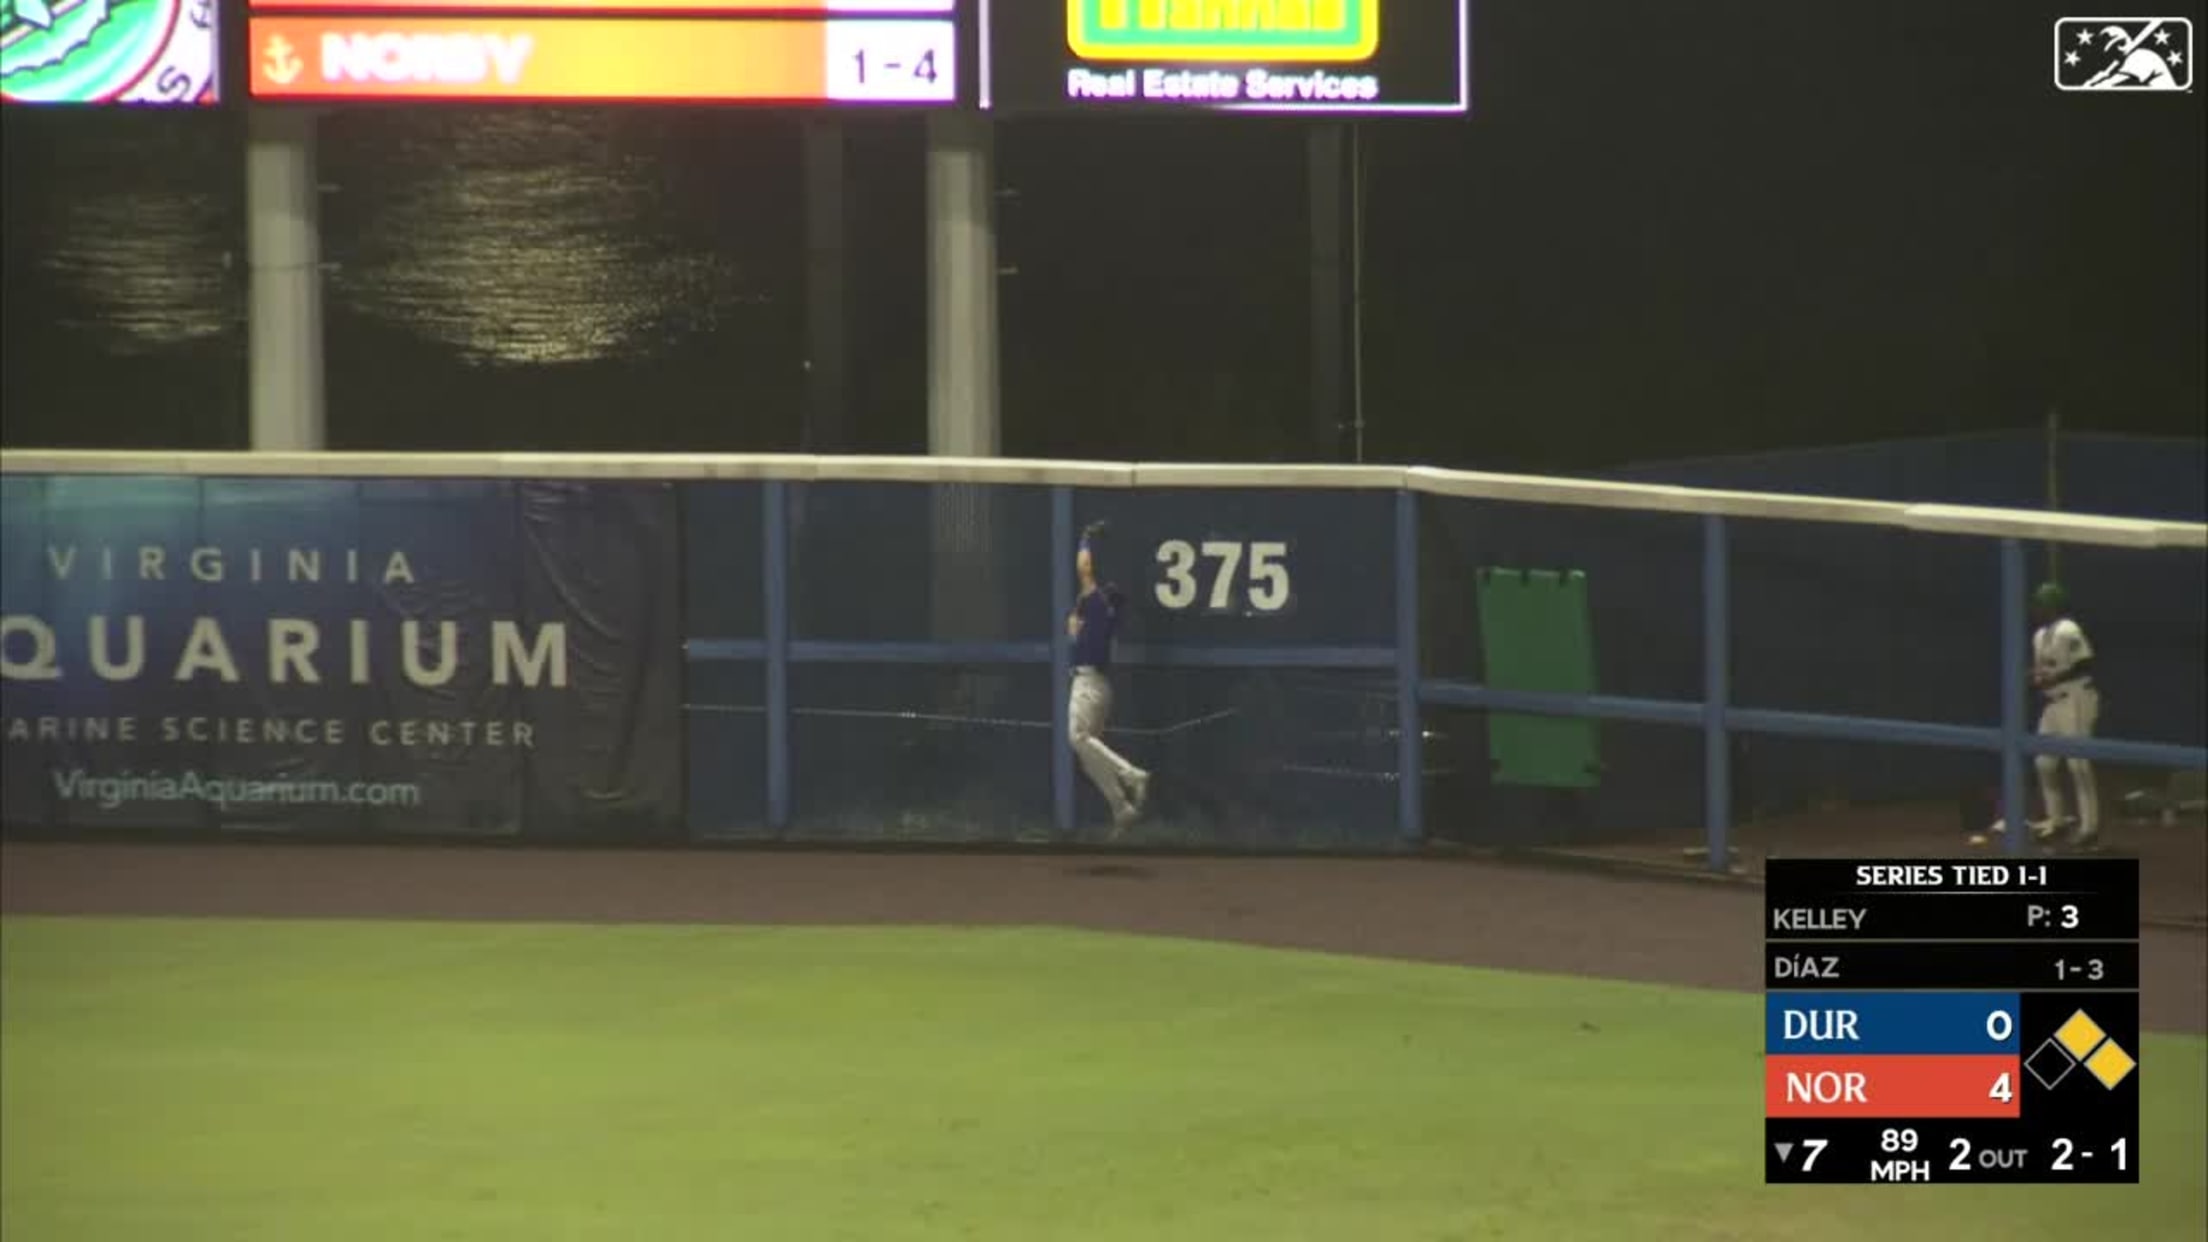 Ruben Cardenas' catch at the wall